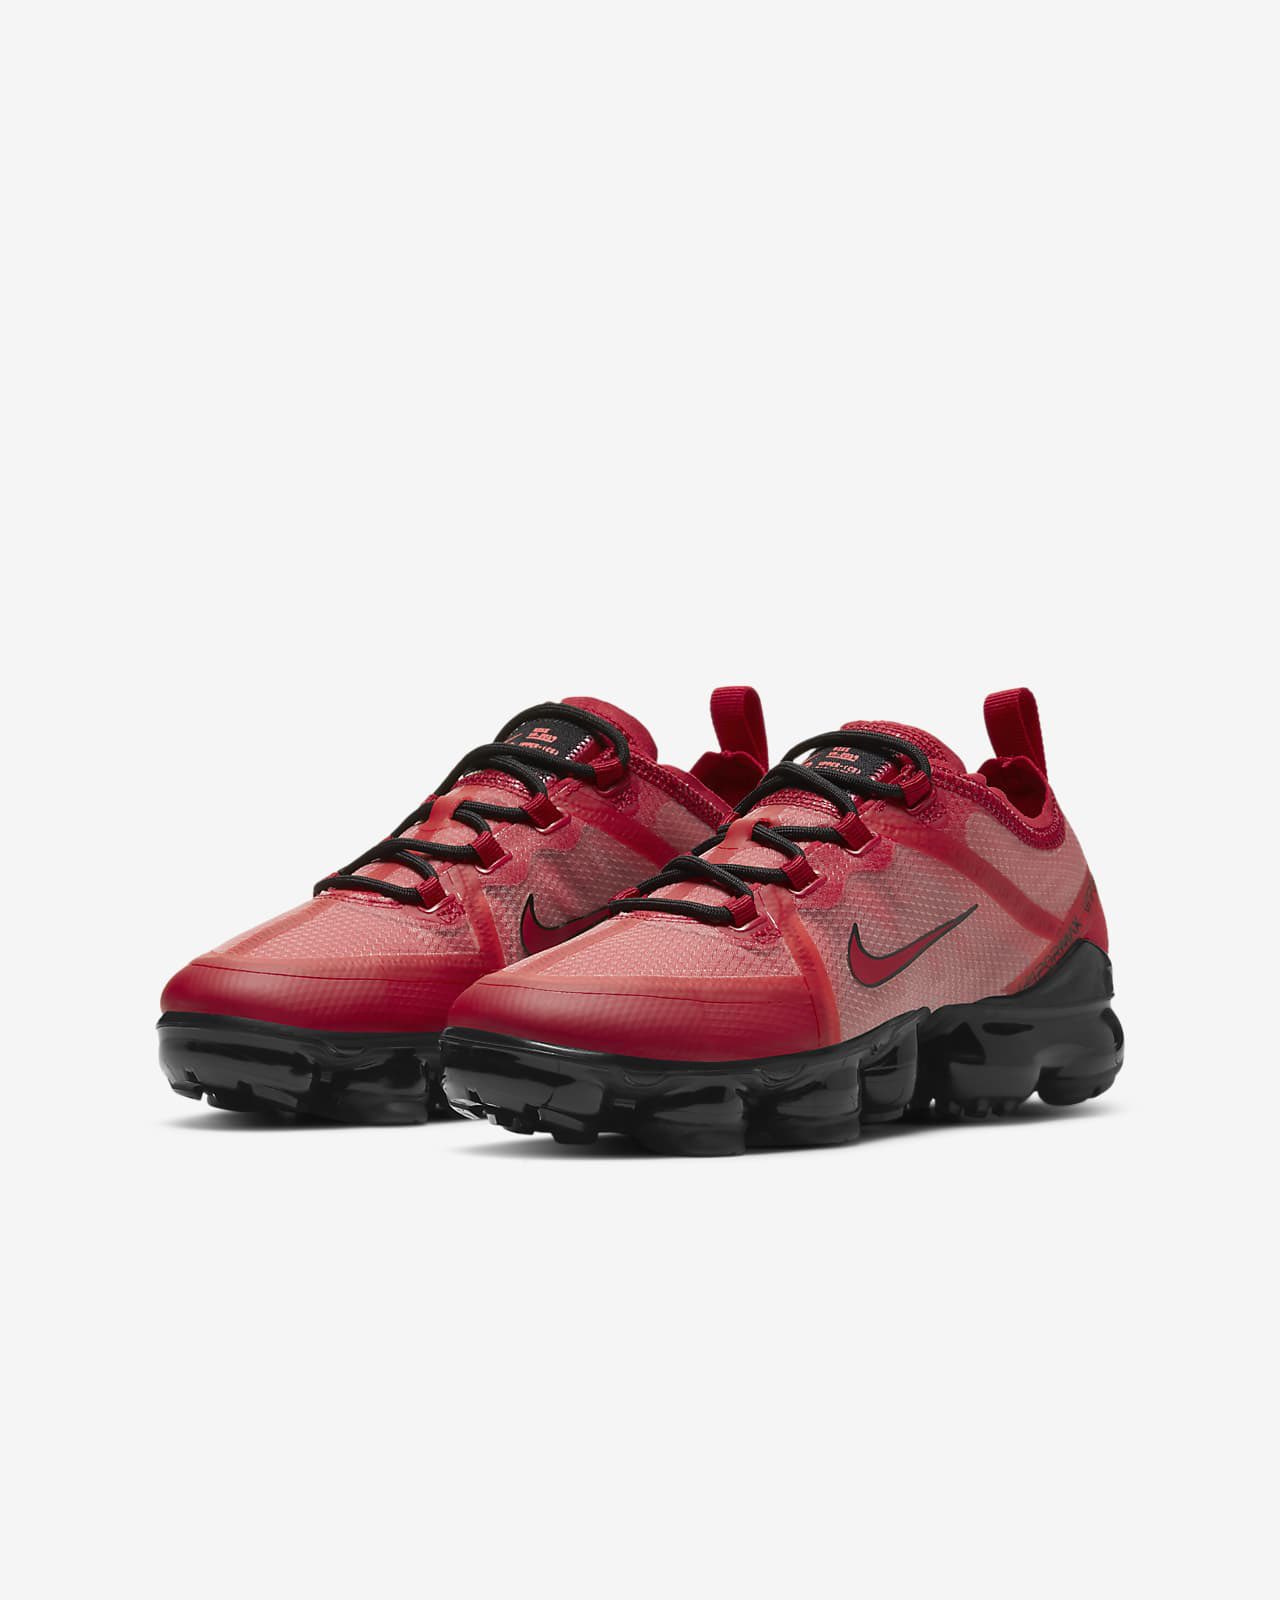 vapormax 2019 black and red